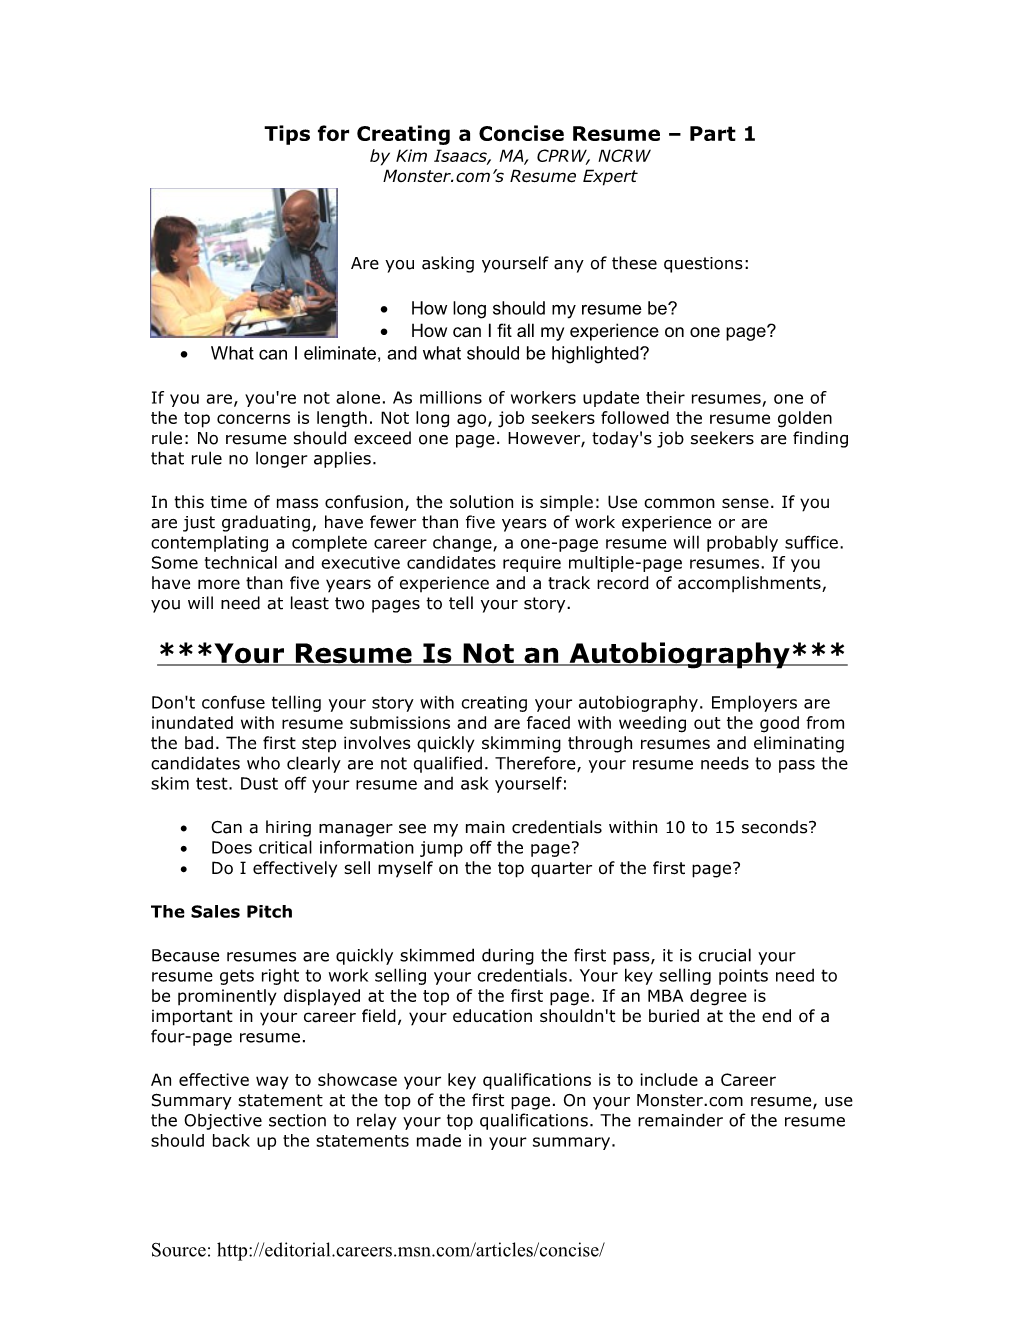 Tips for Creating a Concise Resume Part 1